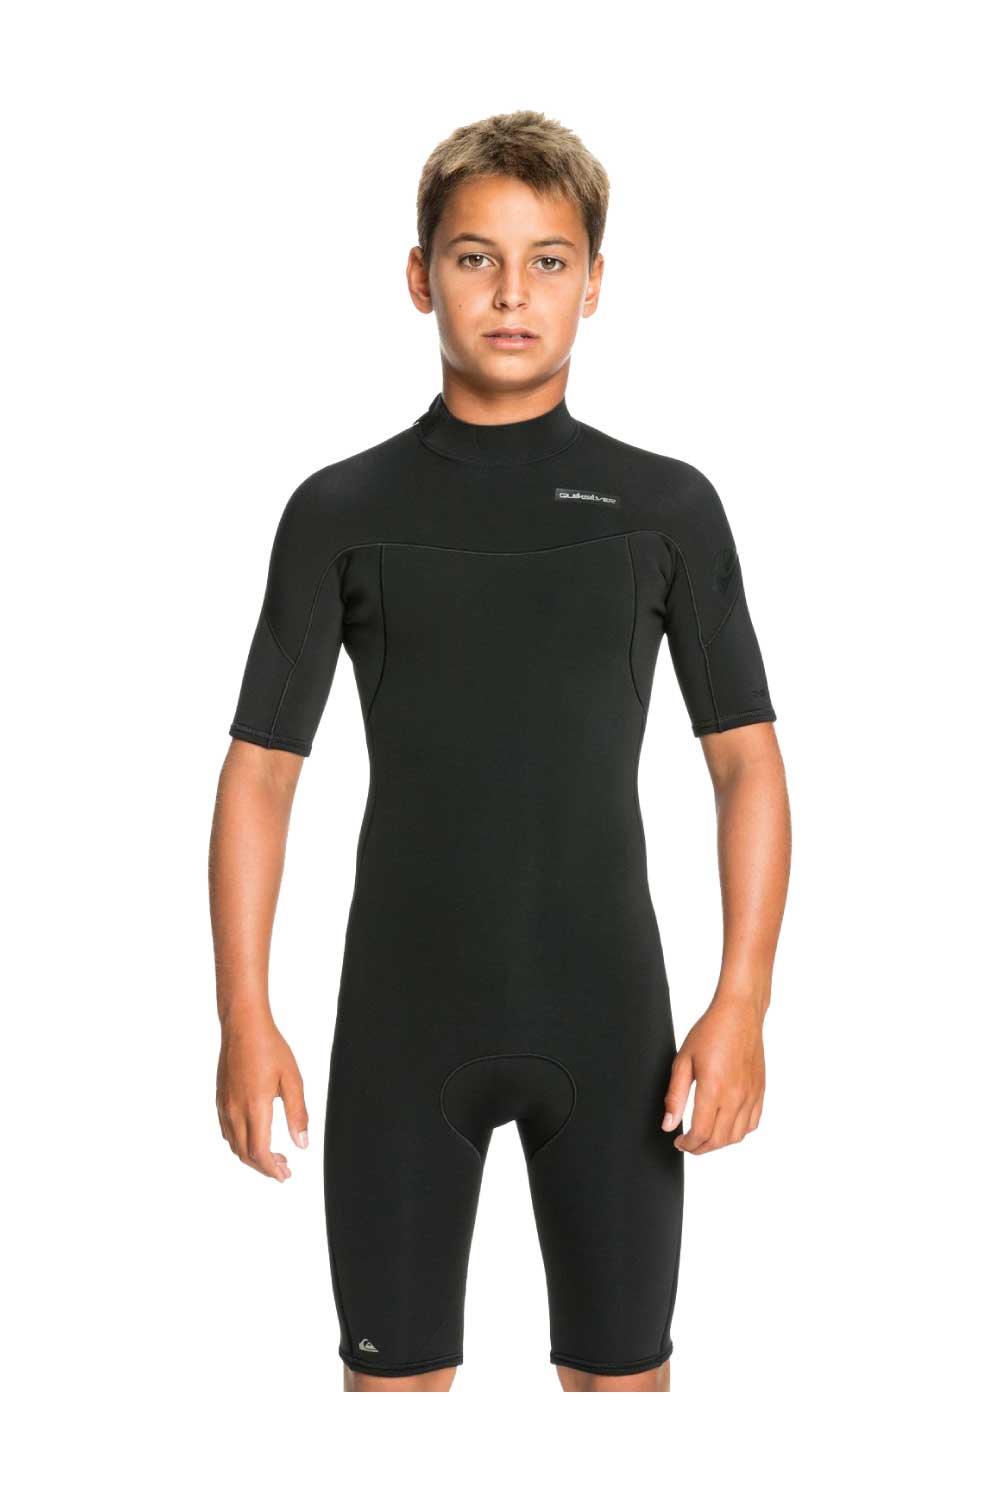 Quiksilver Boys 8-16 2/2mm Everyday Sessions Back Zip Springsuit